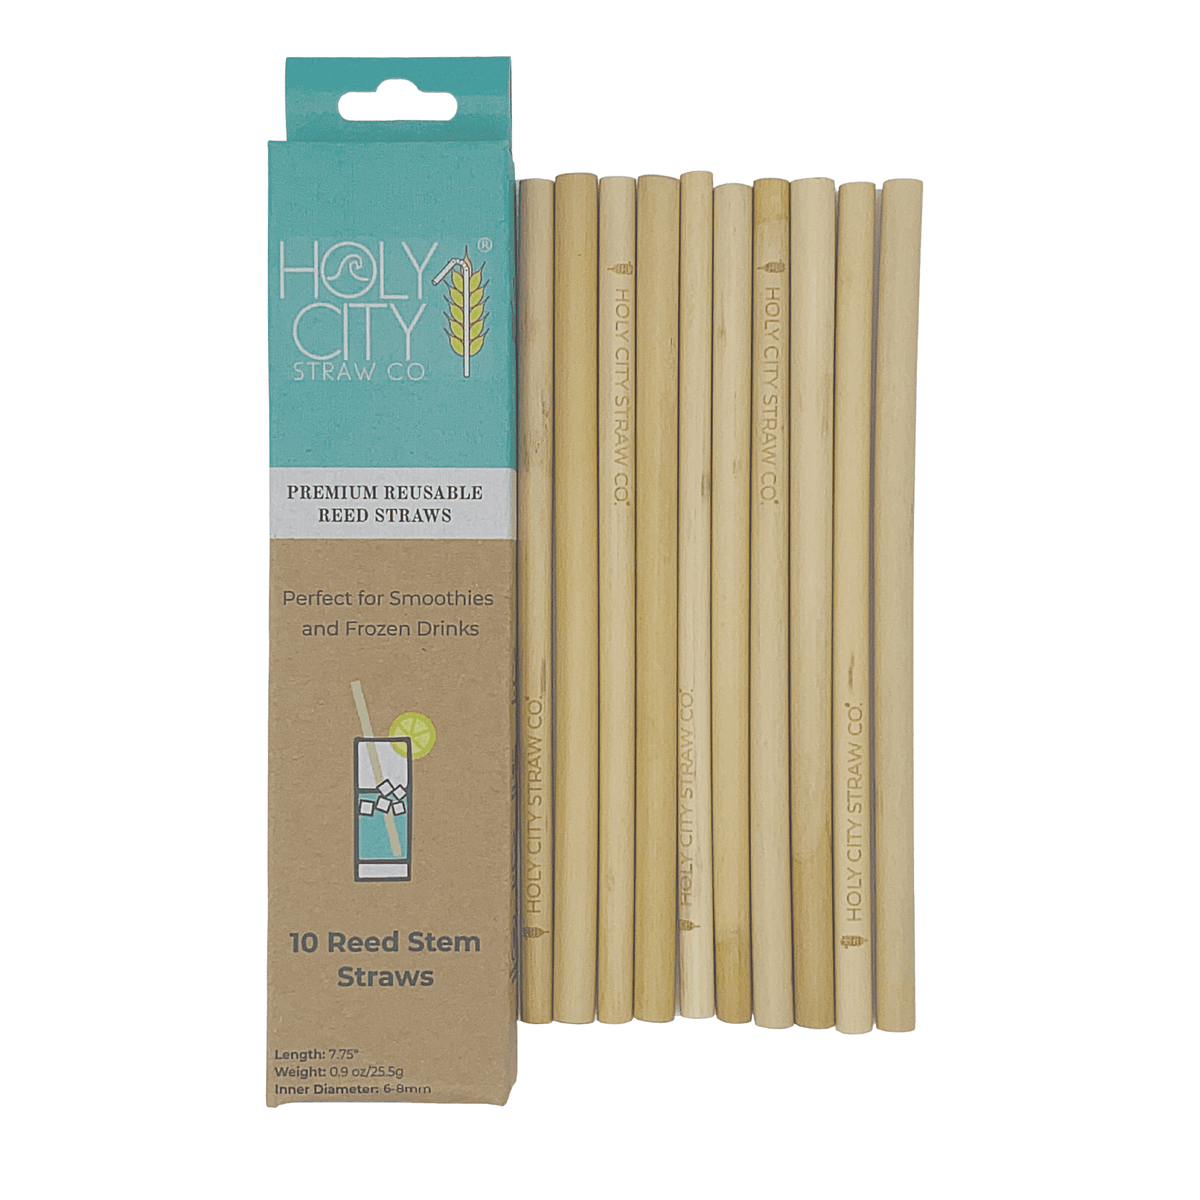 Holy City Straw Tall Reusable Reed Straws - 10 Pack by Farm2Me